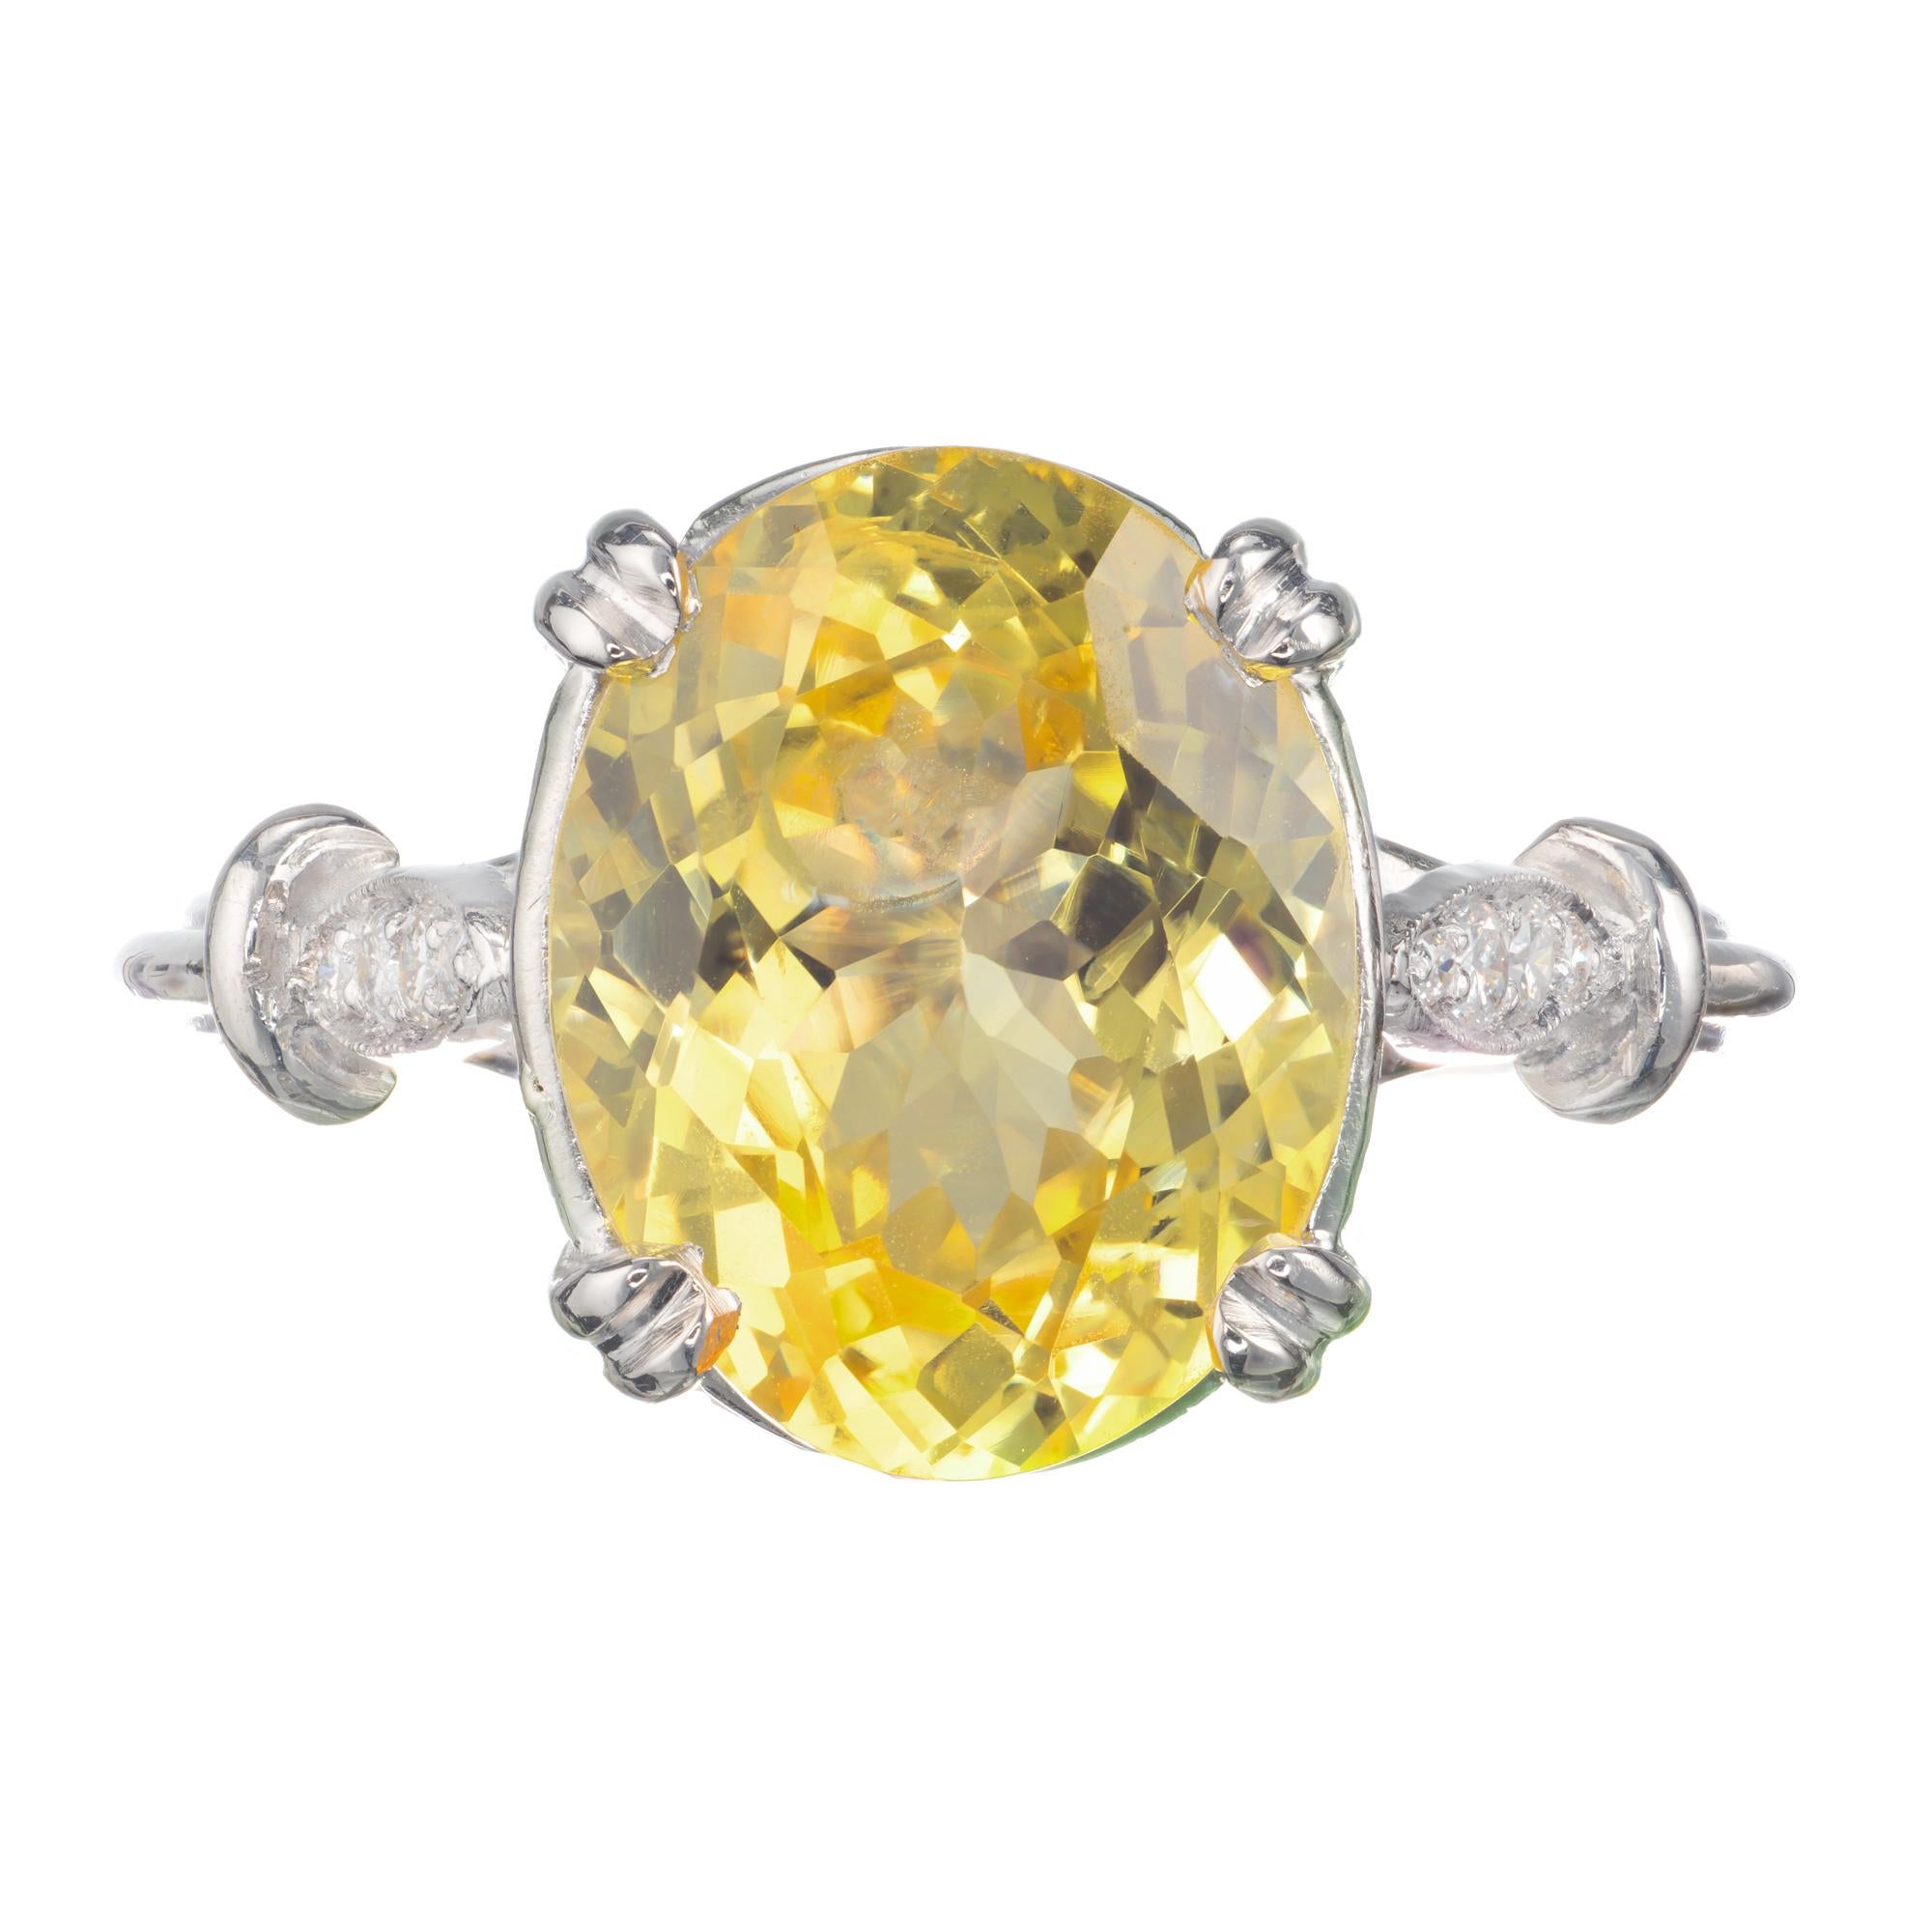 1950’s mid-century lemon yellow 5.52 carat oval sapphire and diamond engagement ring. Set in its original handmade platinum setting with eight accent diamonds. Bright yellow GIA Certified oval natural simple heat only, no other enhancements. 

1